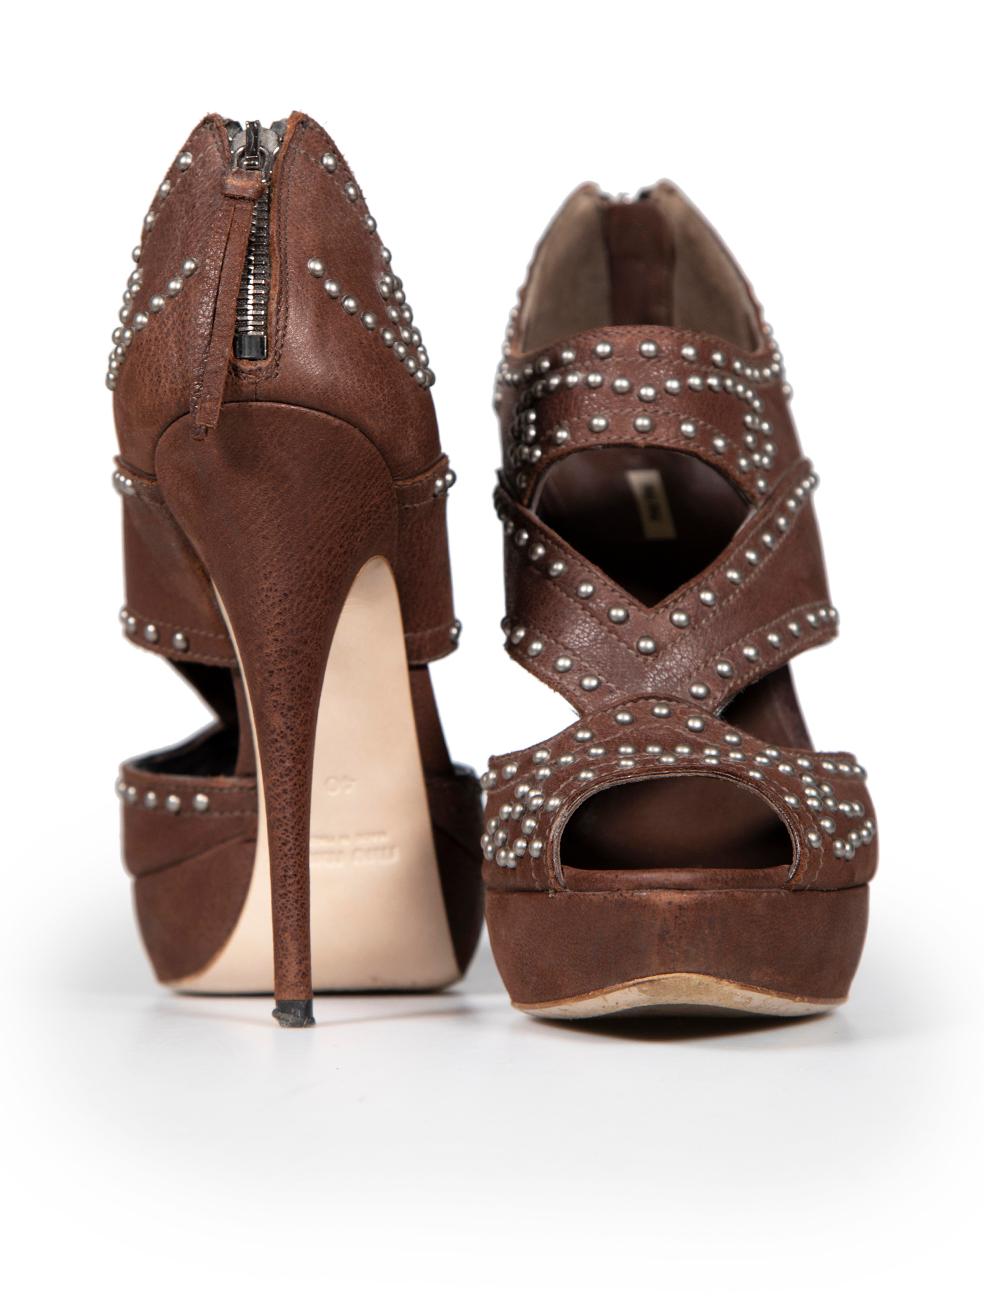 Miu Miu Brown Leather Studded Platform Sandals Size IT 40 In Good Condition For Sale In London, GB